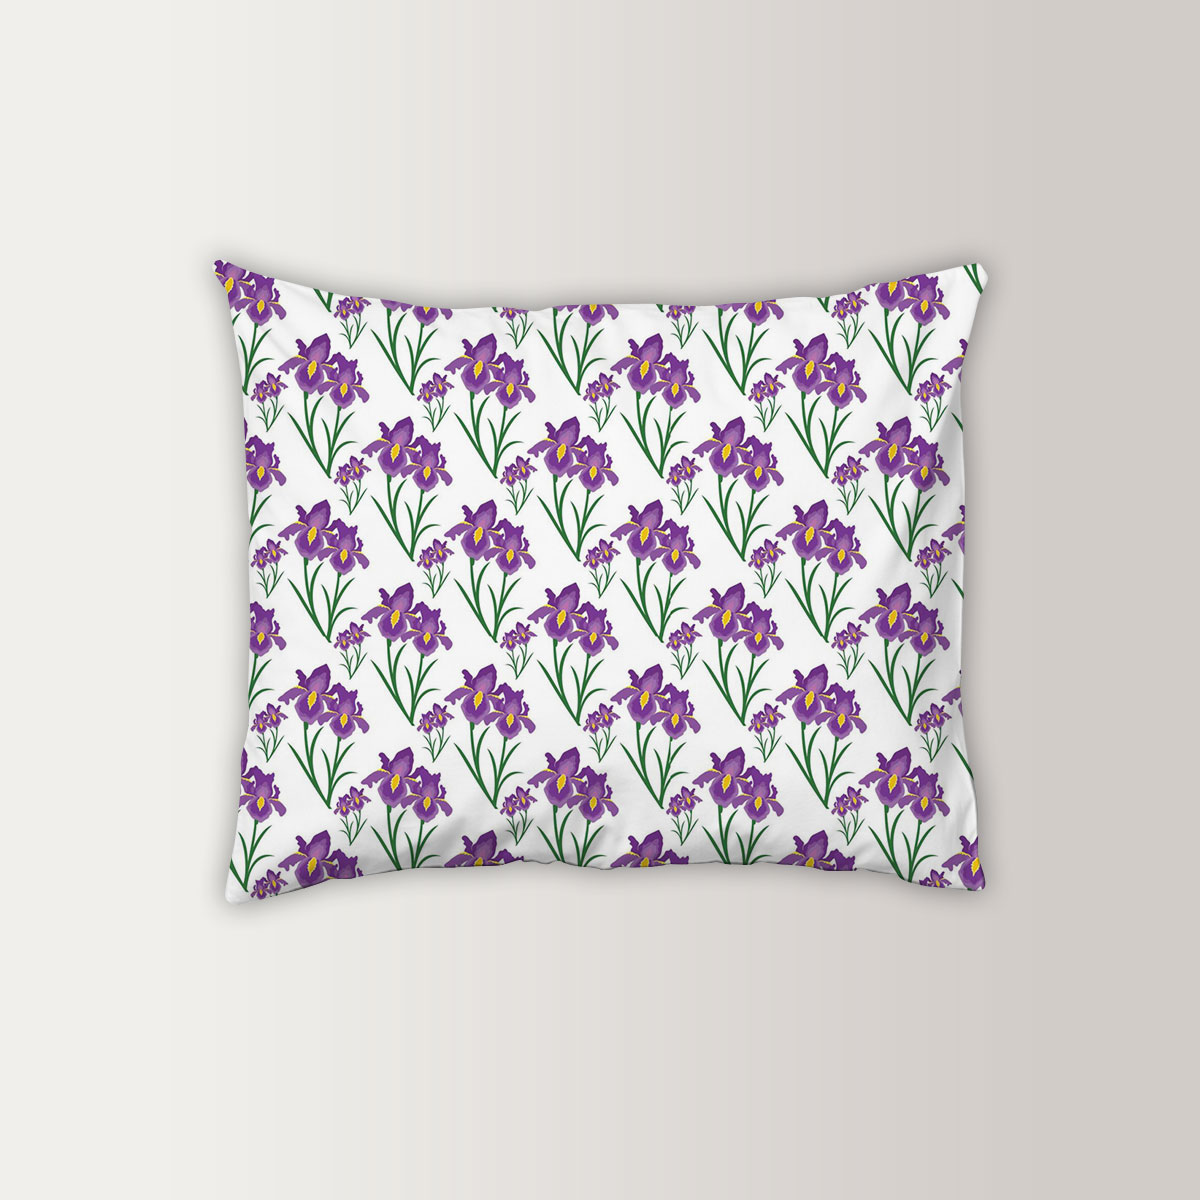 Iris Flower With Leaf Pillow Case